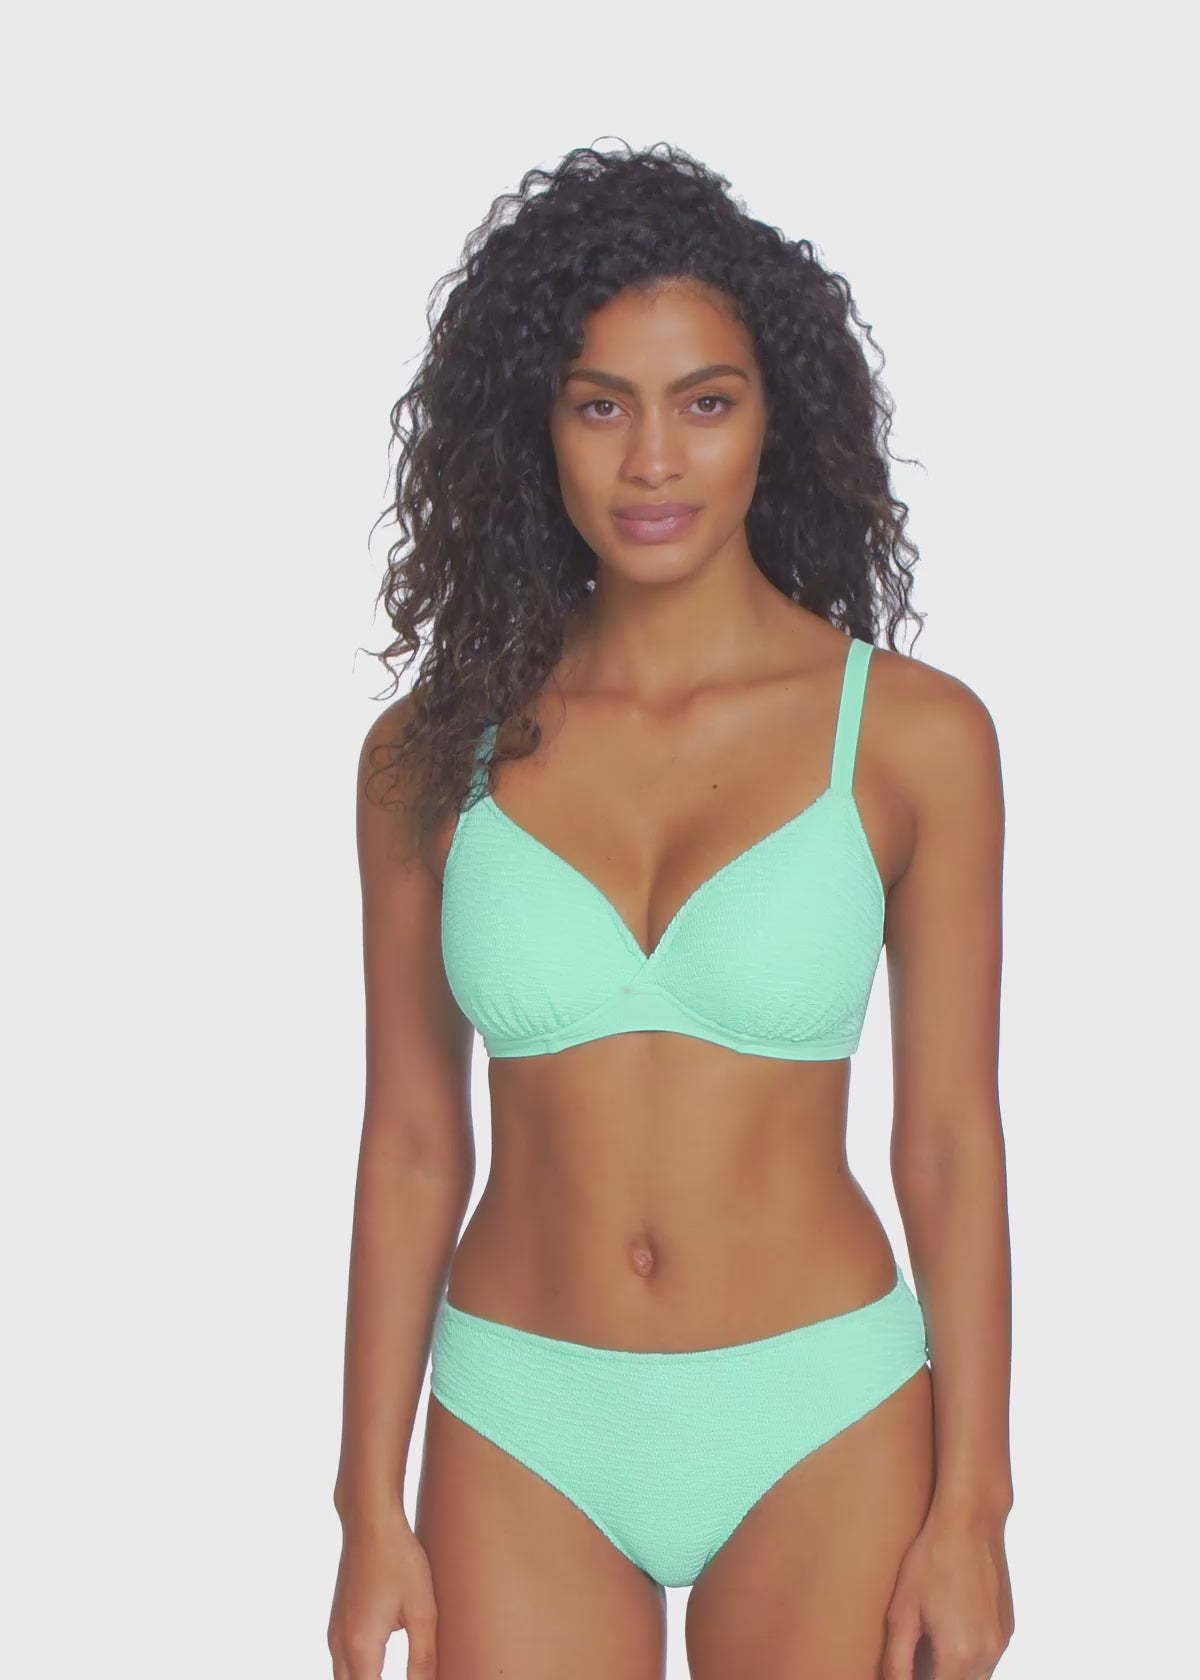 Model turning 360 degrees wearing an underwire plunge bikini top in light turquoise